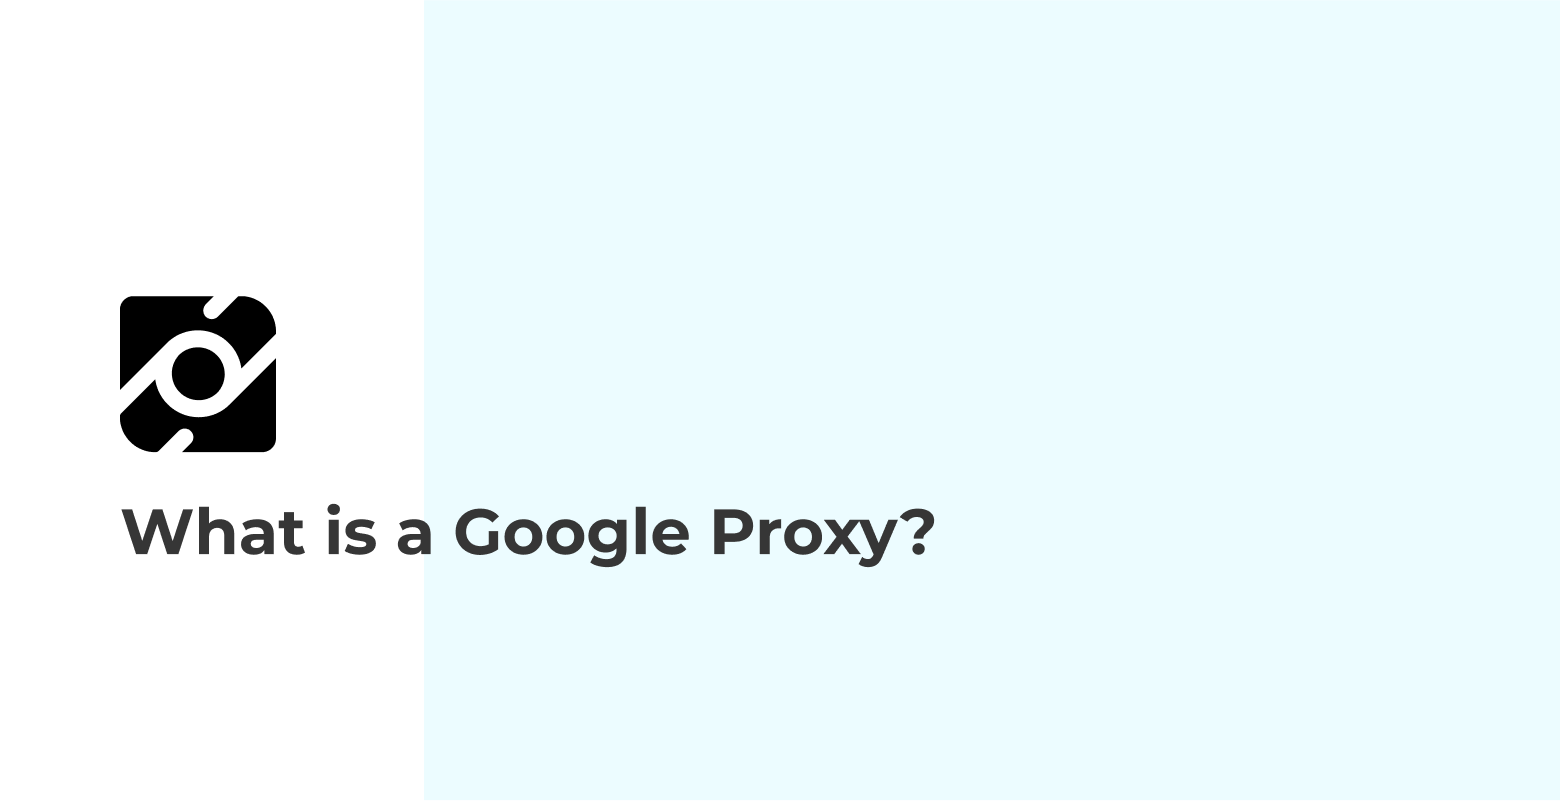 What is a Google Proxy?